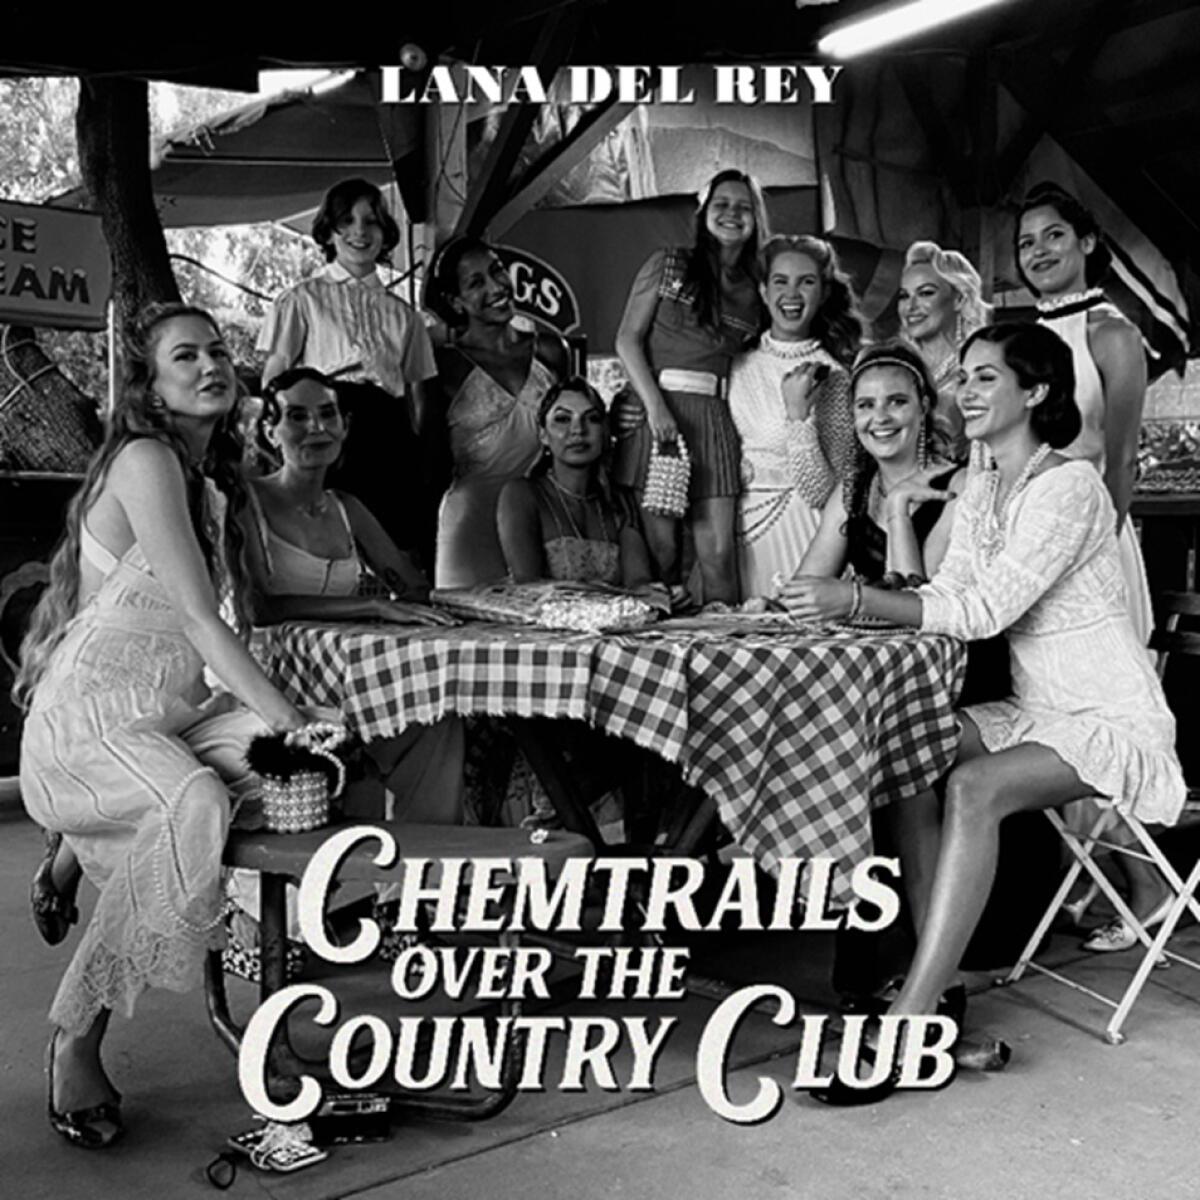 This cover image released by Interscope Records and Polydor Records shows "Chemtrails Over the Country Club" by Lana Del Rey. (Interscope Records and Polydor Records via AP)